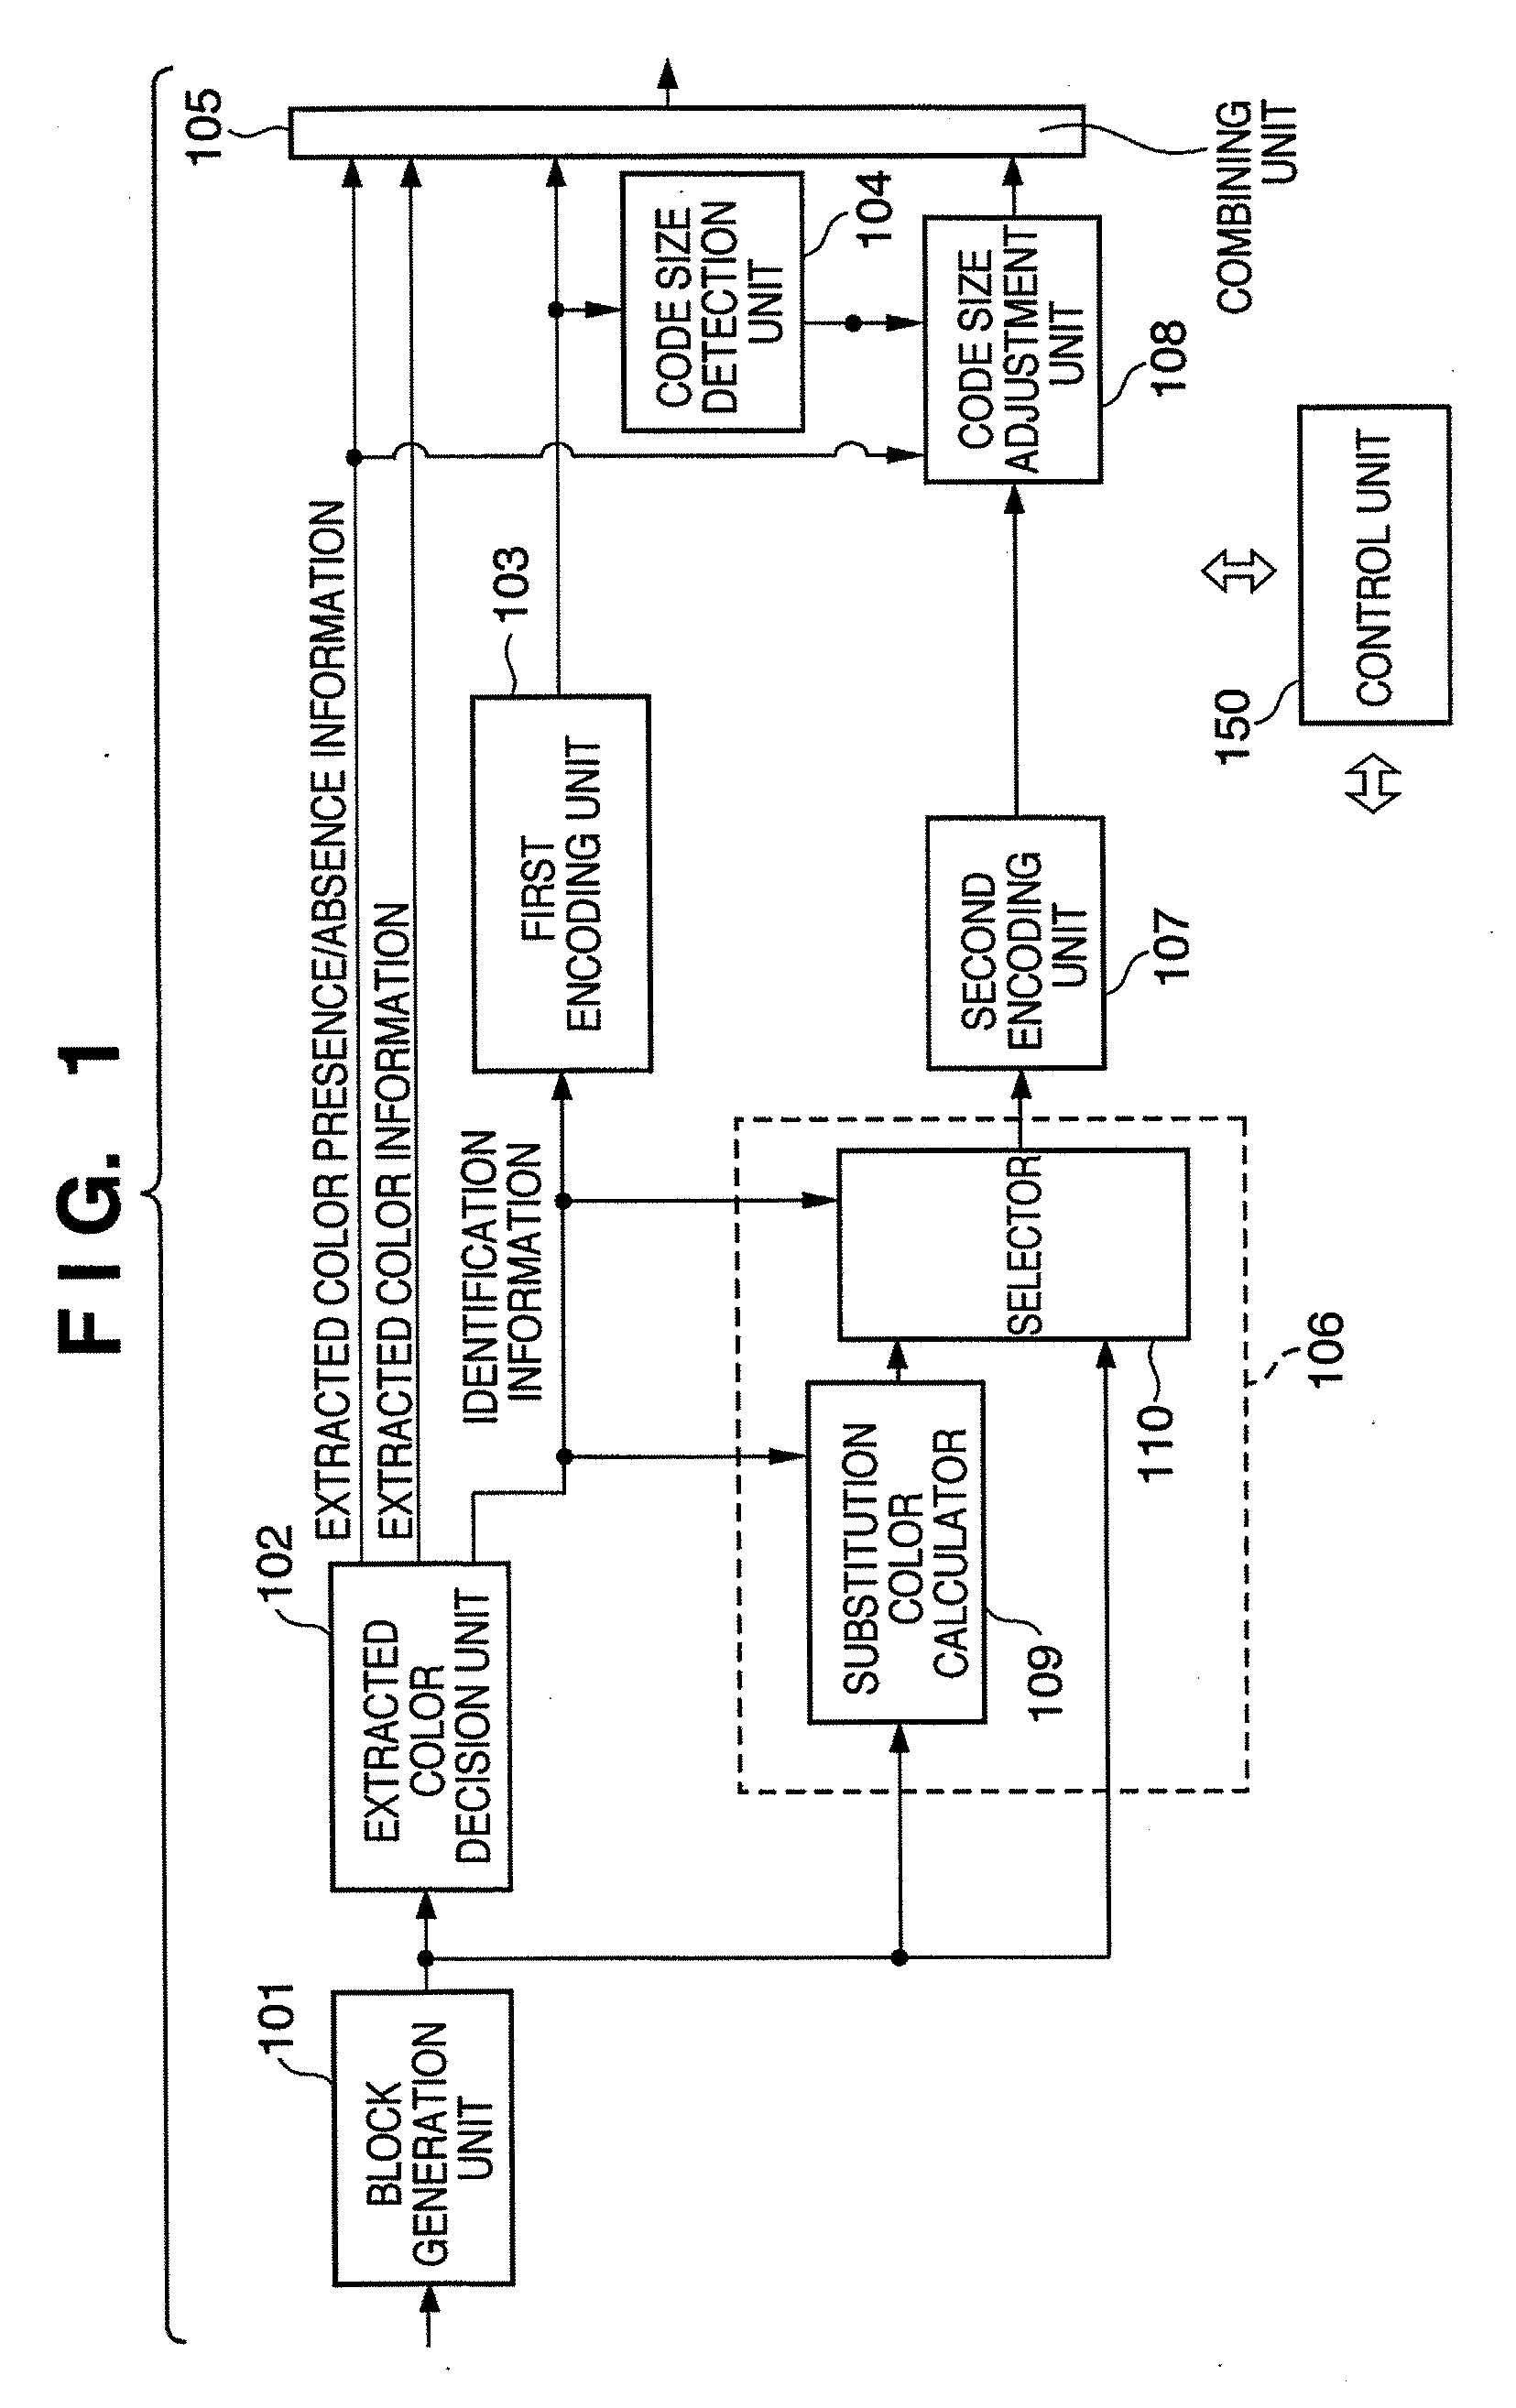 Image encoding apparatus and decoding apparatus, and control method thereof